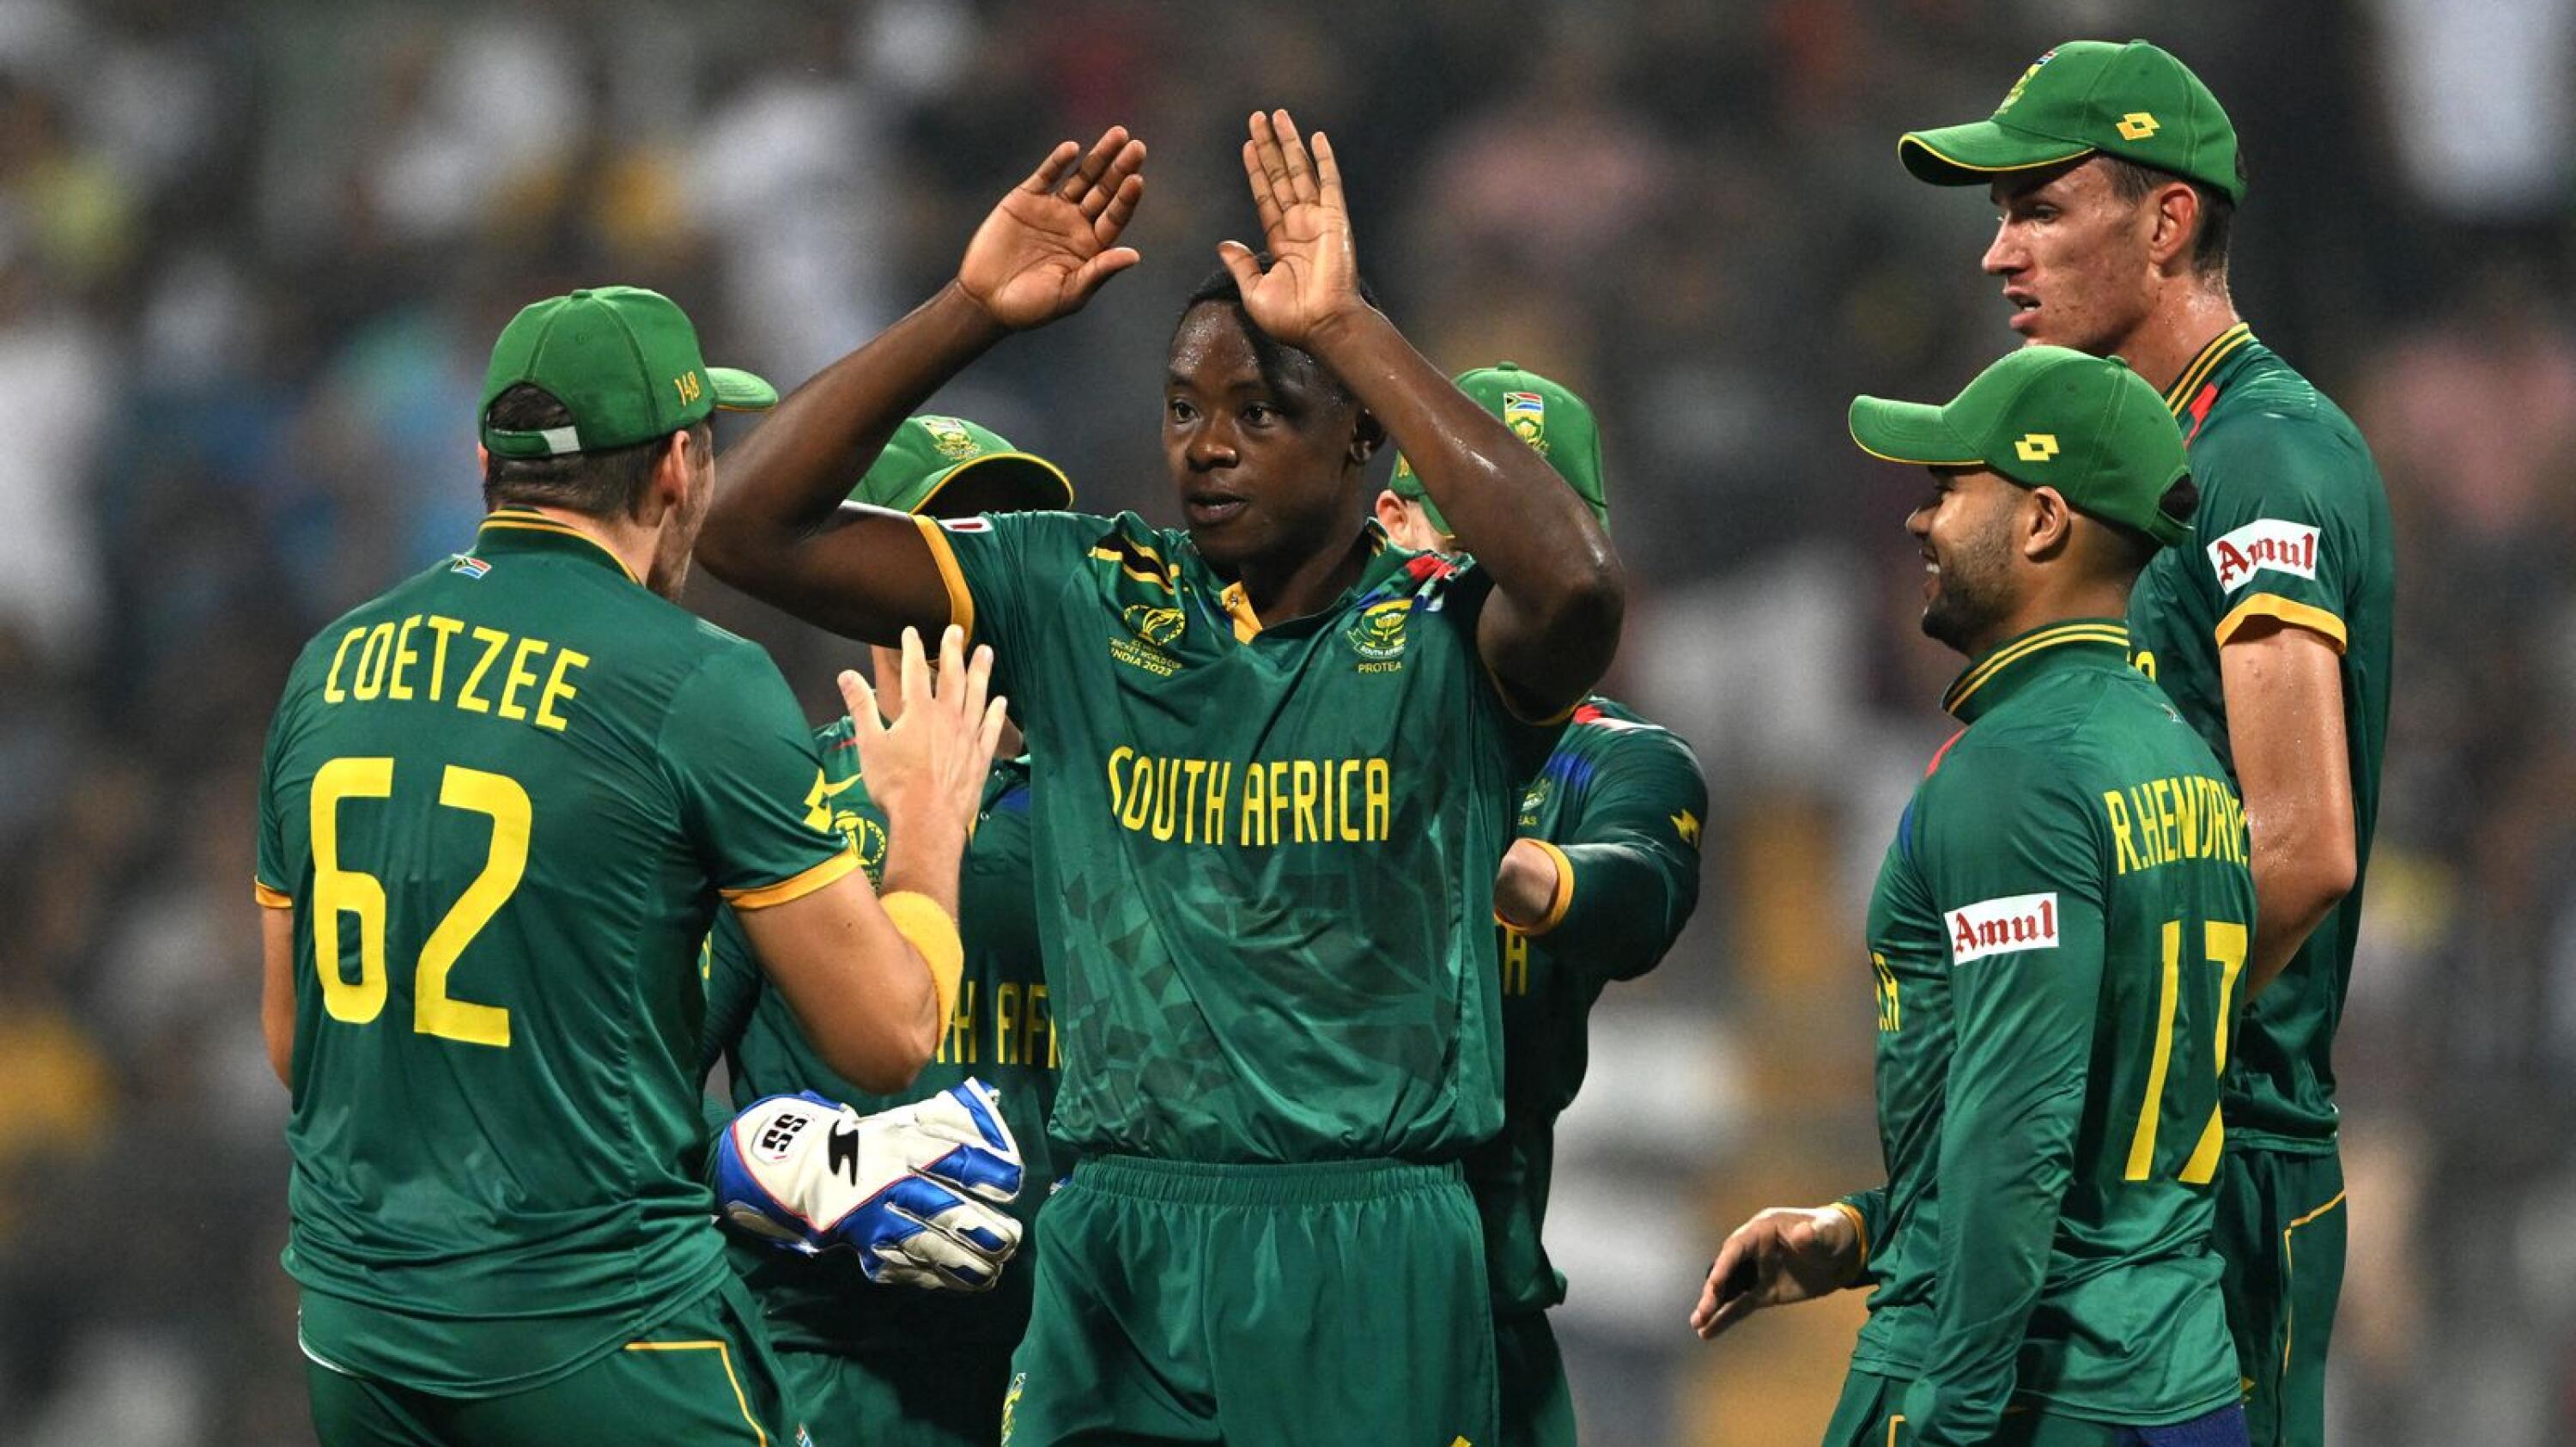 South Africa's Kagiso Rabada celebrates with teammates after taking the wicket of England's Ben Stokes during their Cricket World Cup match